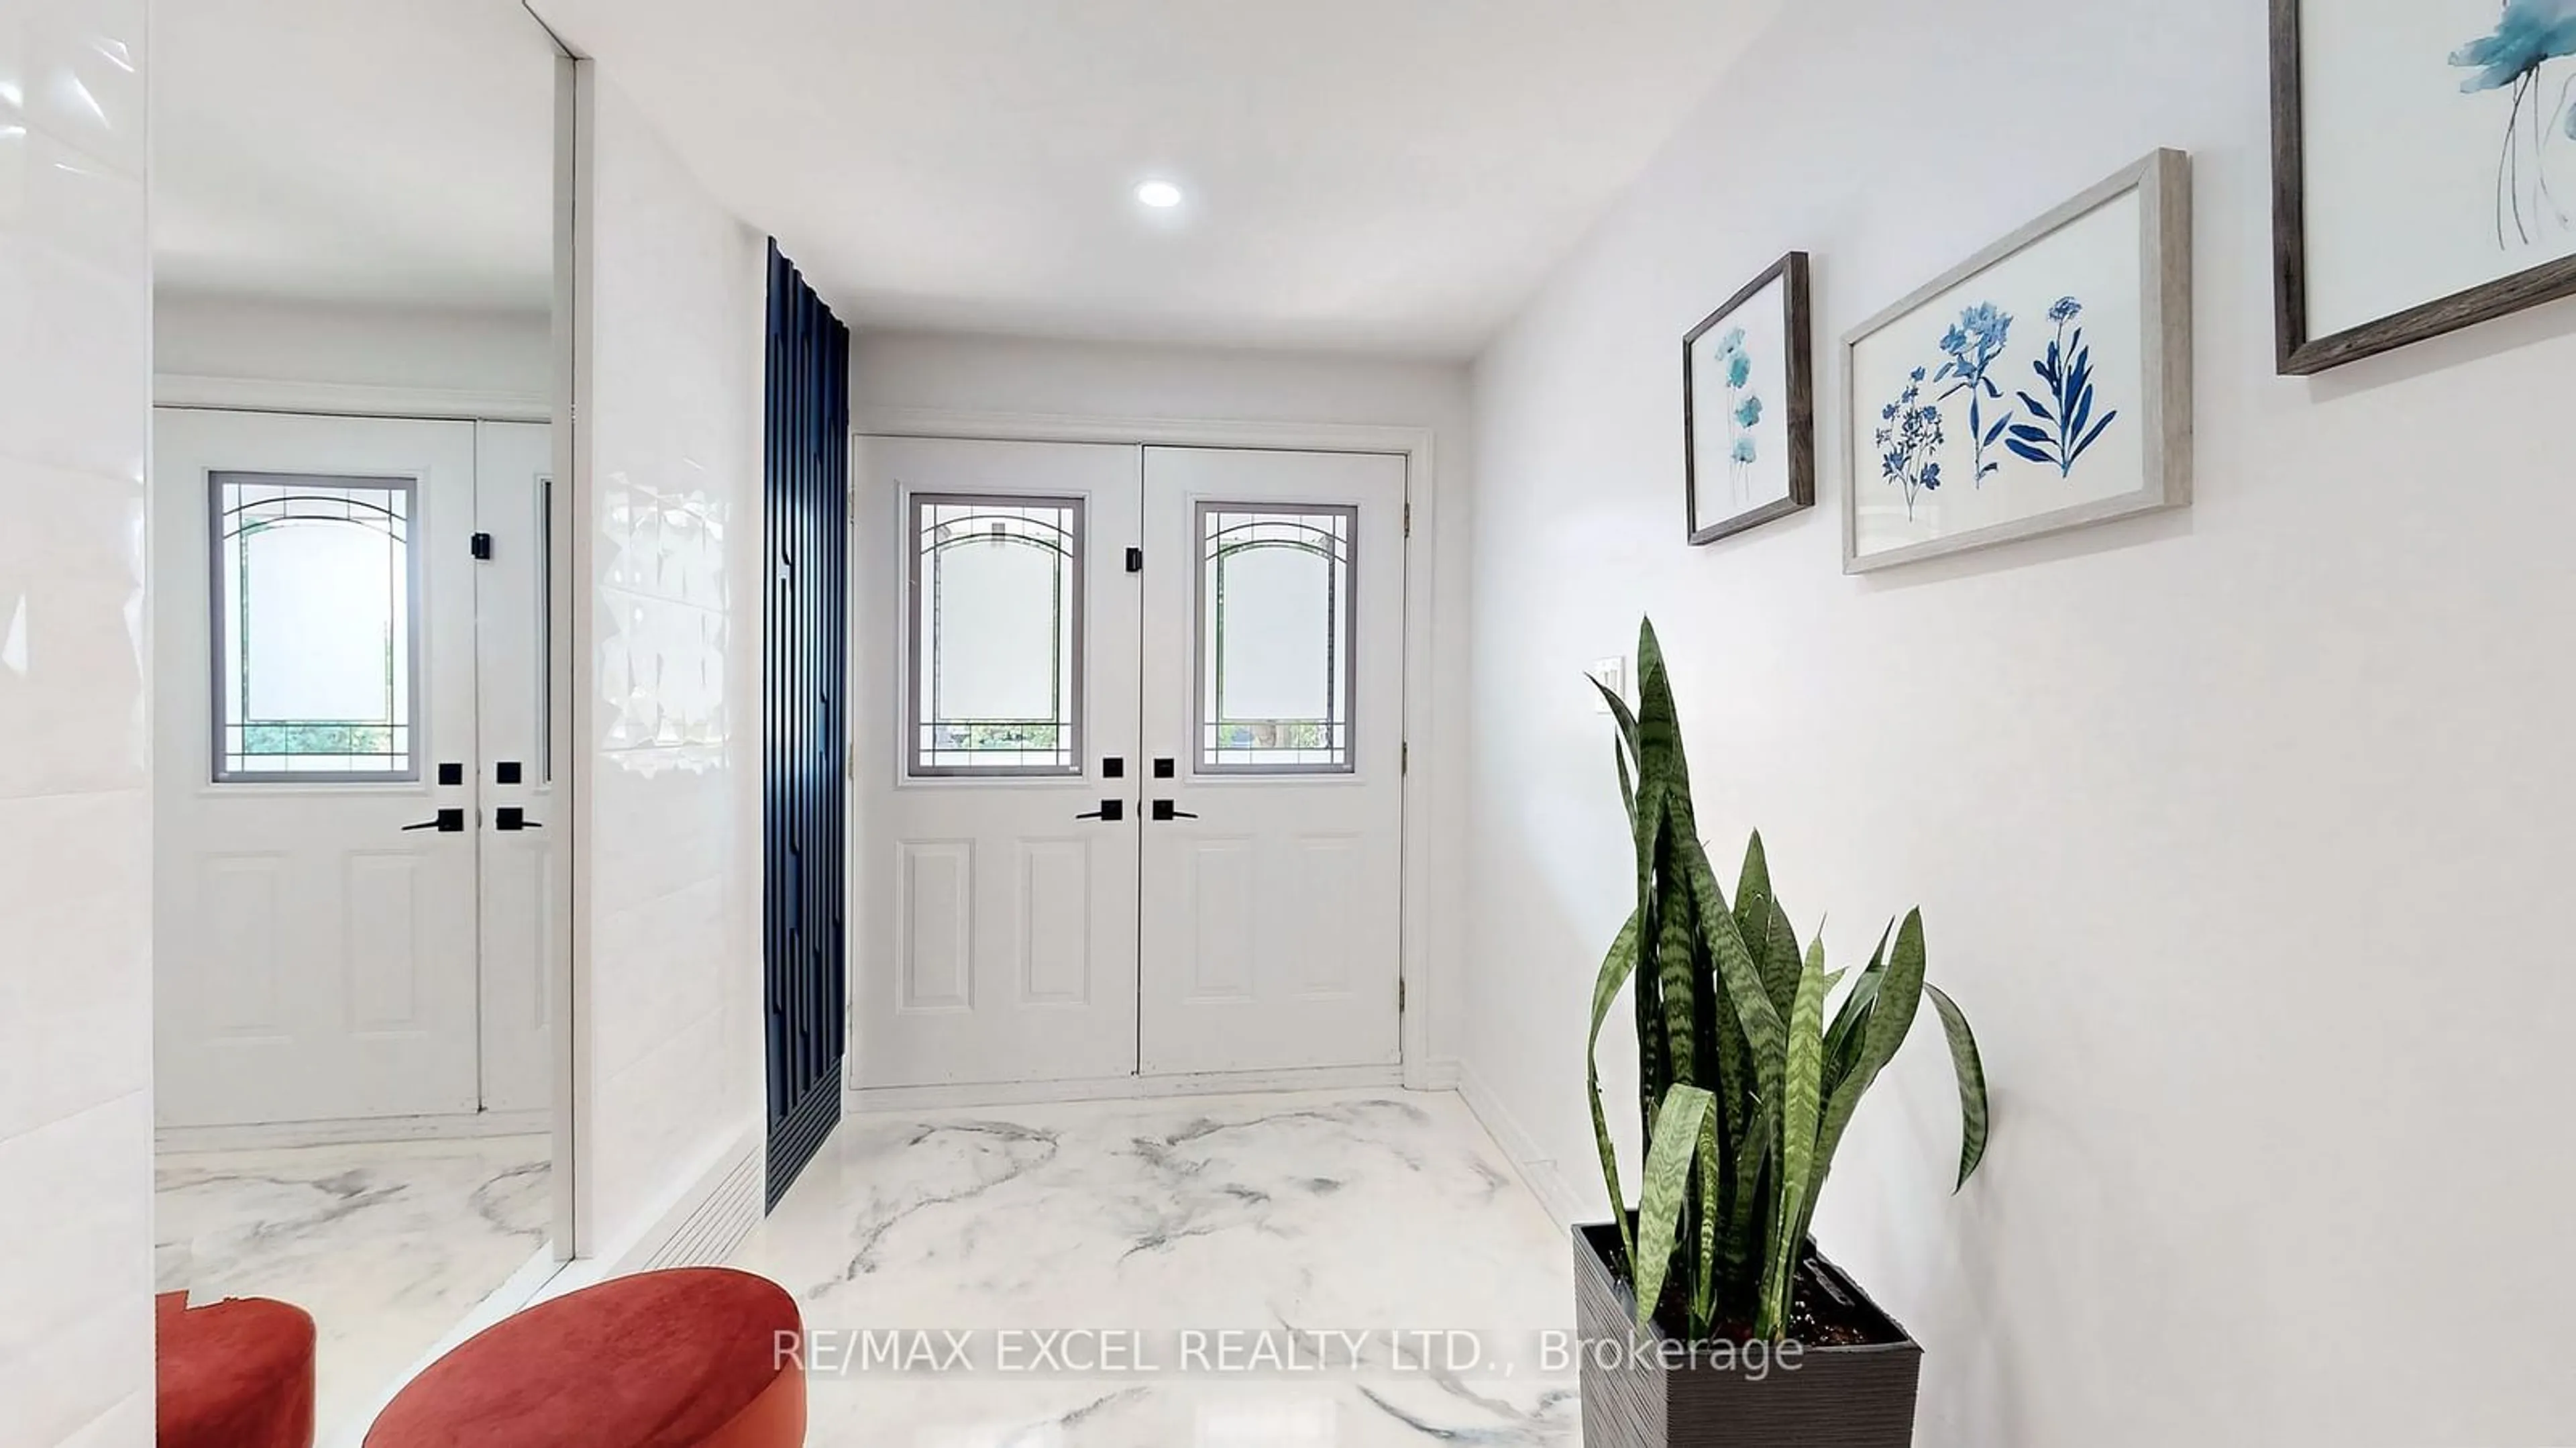 Indoor entryway for 220 Gracefield Ave, Toronto Ontario M6L 1L8